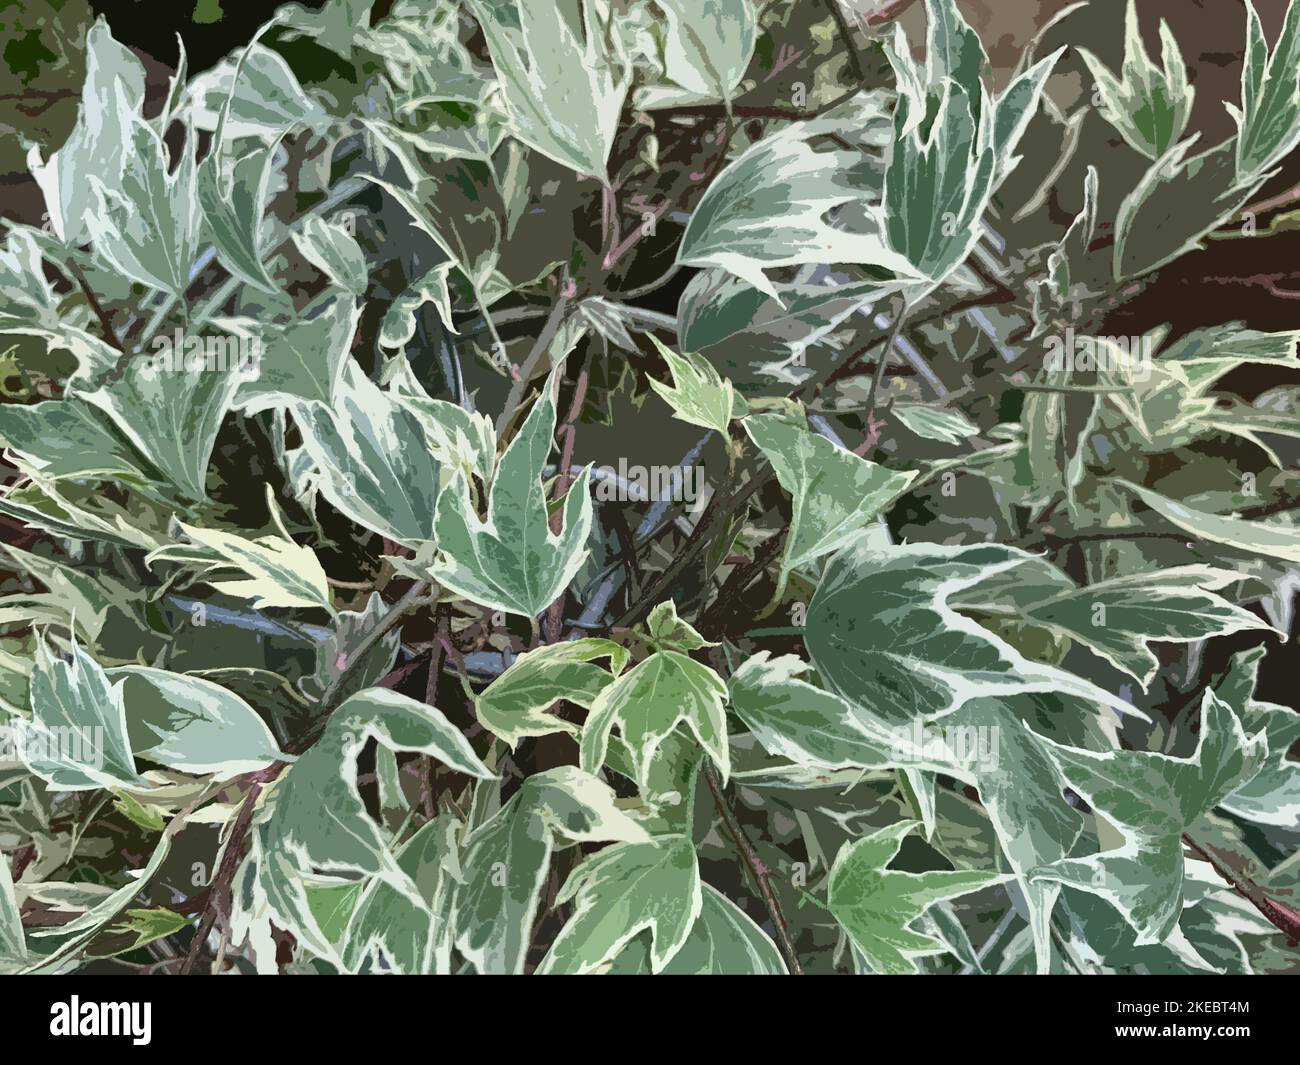 Illustrative closeup of the green leaves with white cream margins of the evergreen perennial garden plant Hedera helix White Ripple. Stock Photo